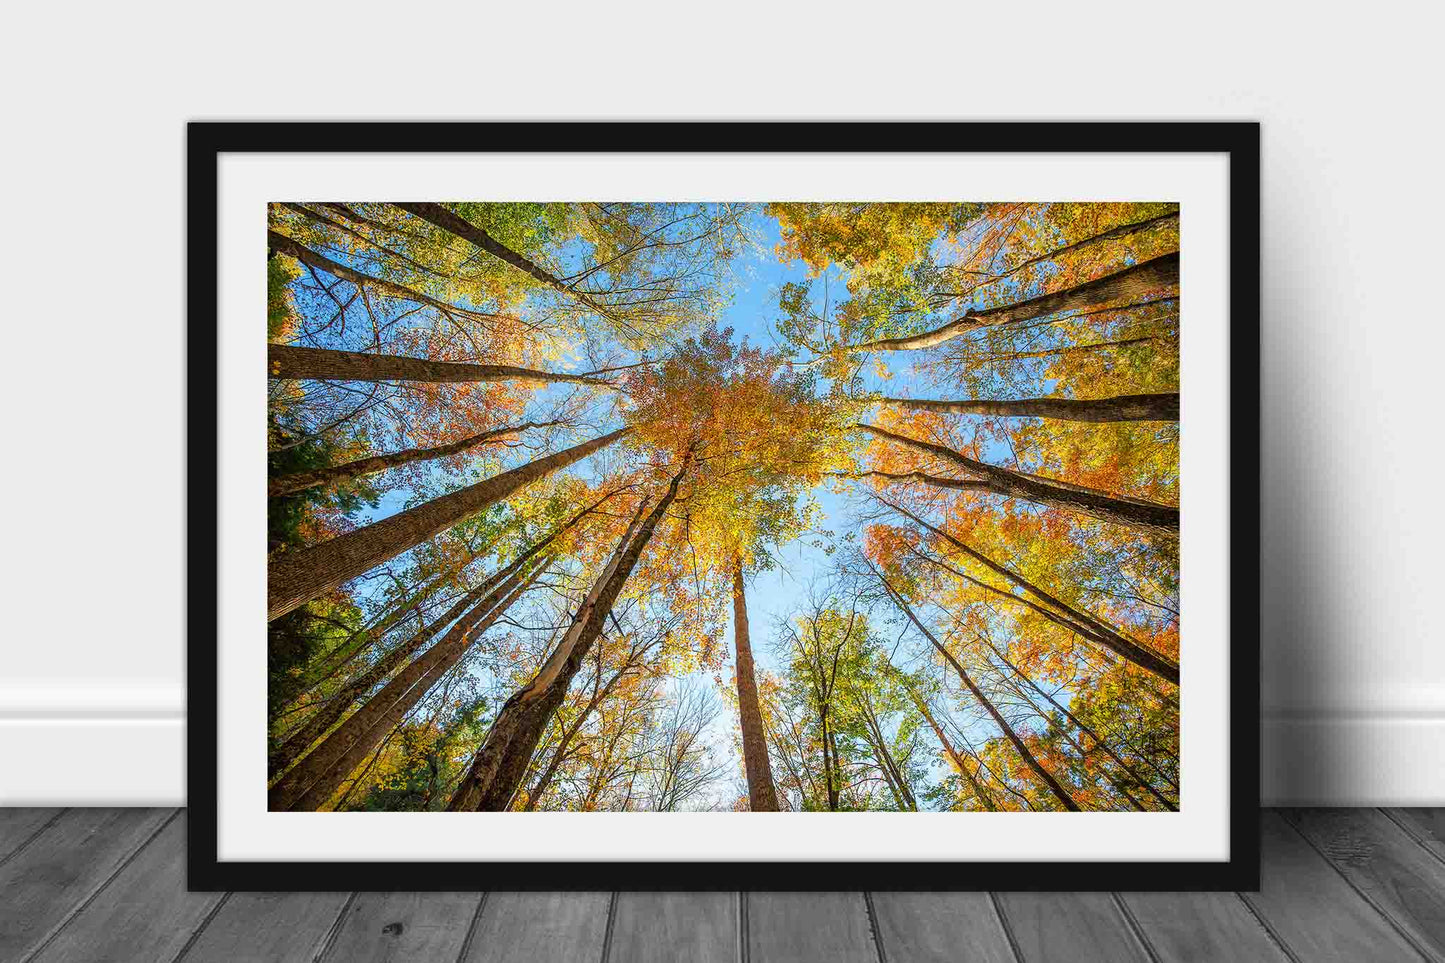 Framed nature print with optional mat of looking up in trees under a forest canopy on an autumn day in the Great Smoky Mountains of Tennessee by Sean Ramsey of Southern Plains Photography.